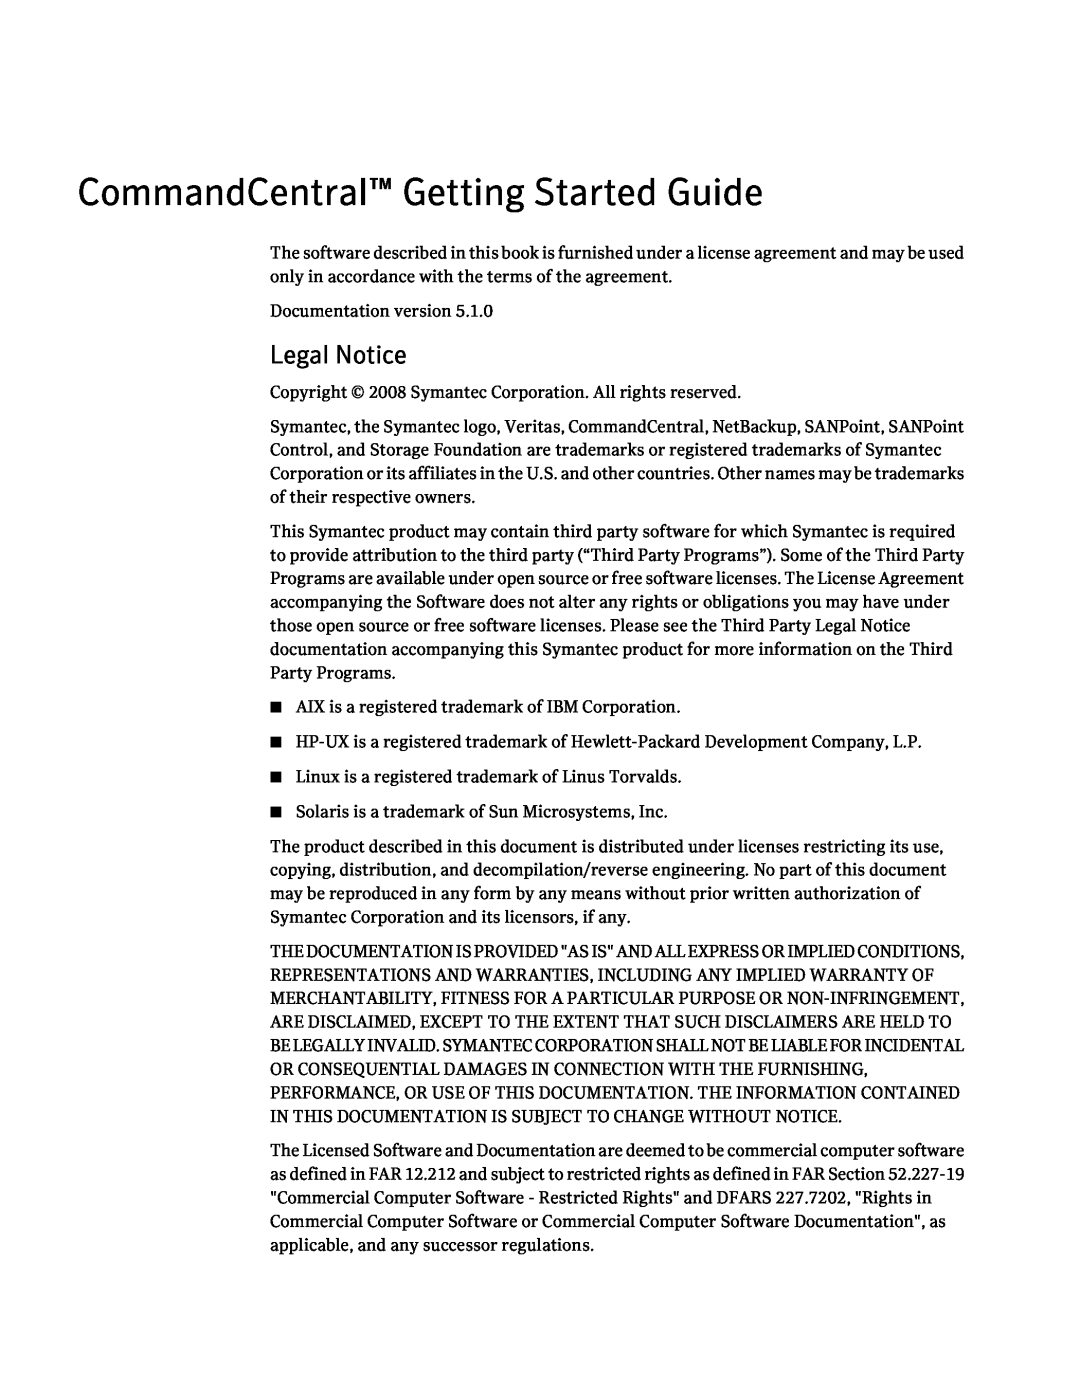 Symantec 5.1 manual CommandCentral Getting Started Guide, Legal Notice 